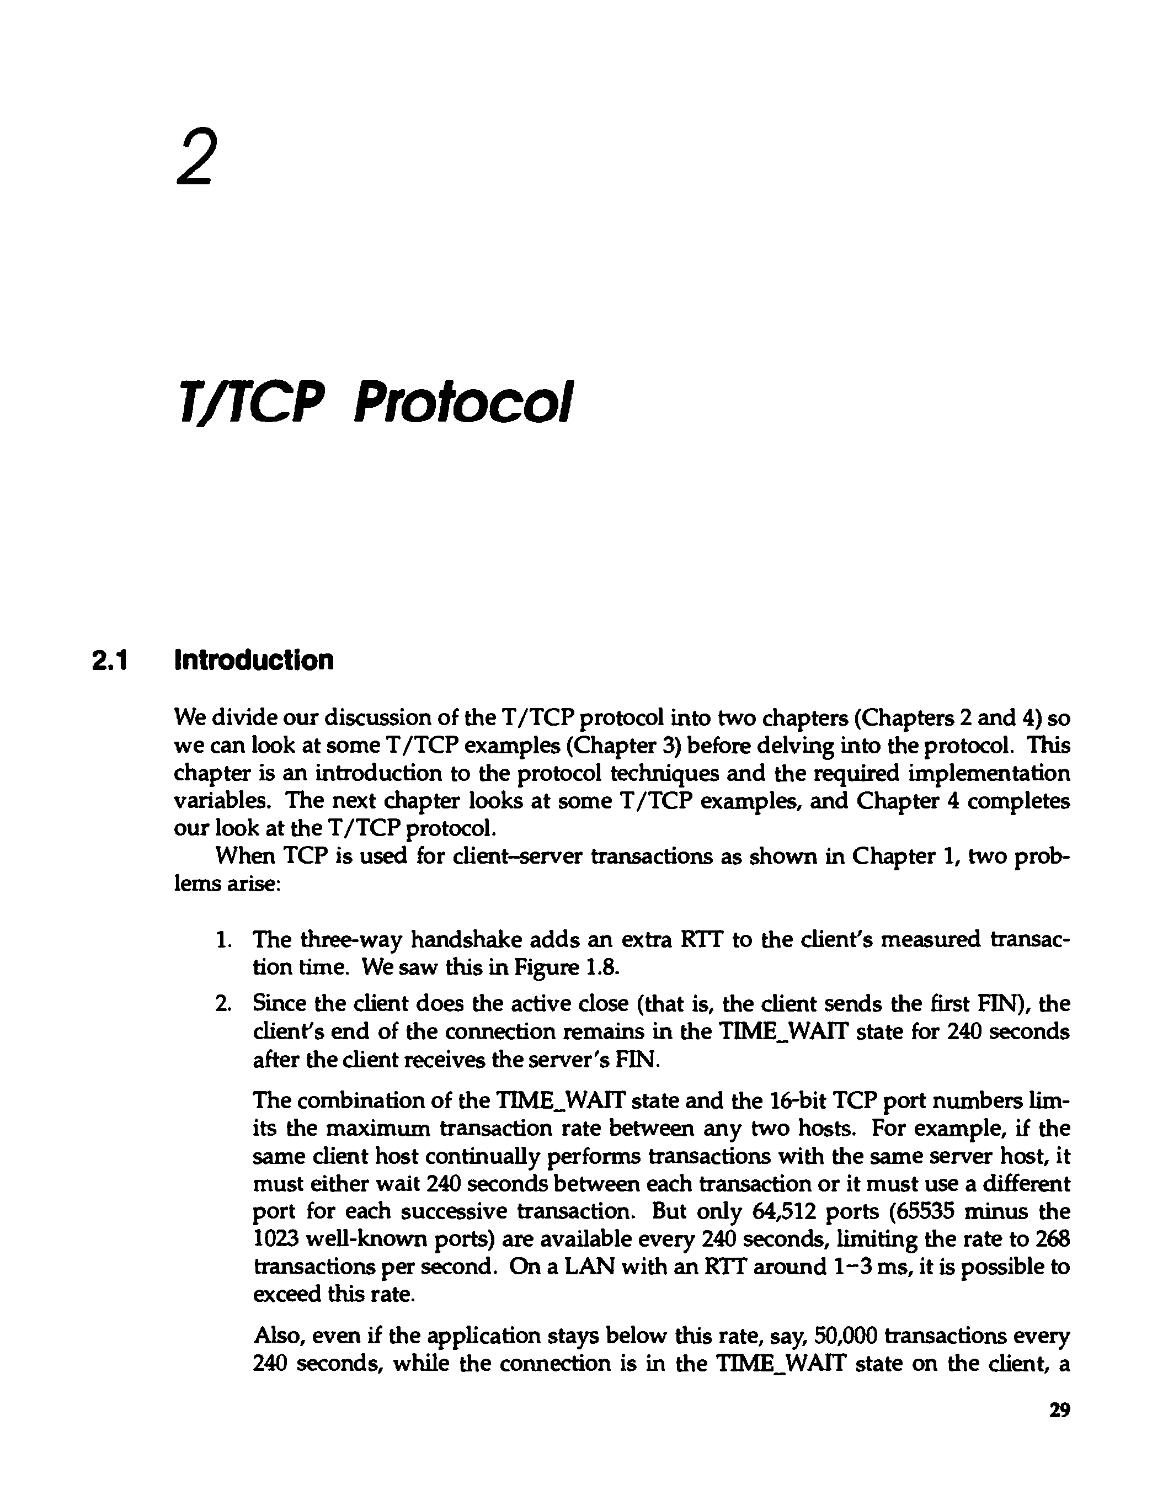 Chapter 2. T/TCP Protocol